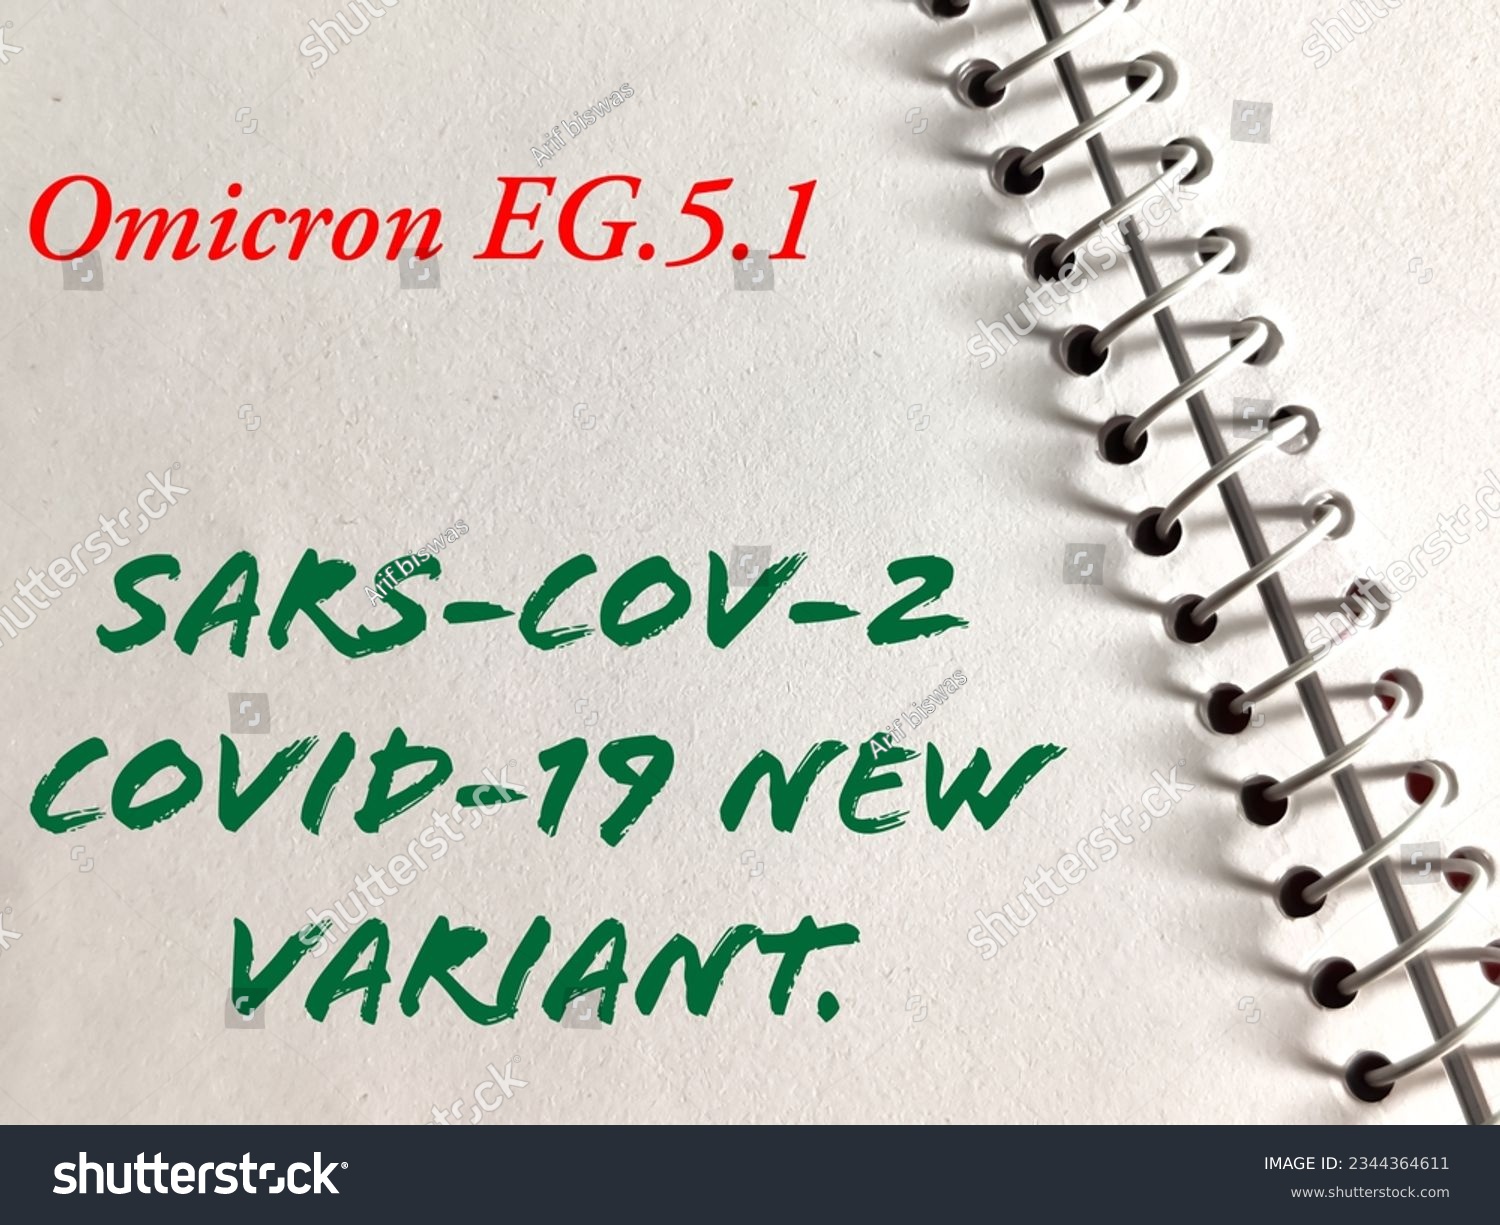 SARS-COV-2, New Variant Omicron EG.5.1 terms. A new Covid-19 variant which has descended from the rapidly spreading Omicron and was first flagged in the UK #2344364611